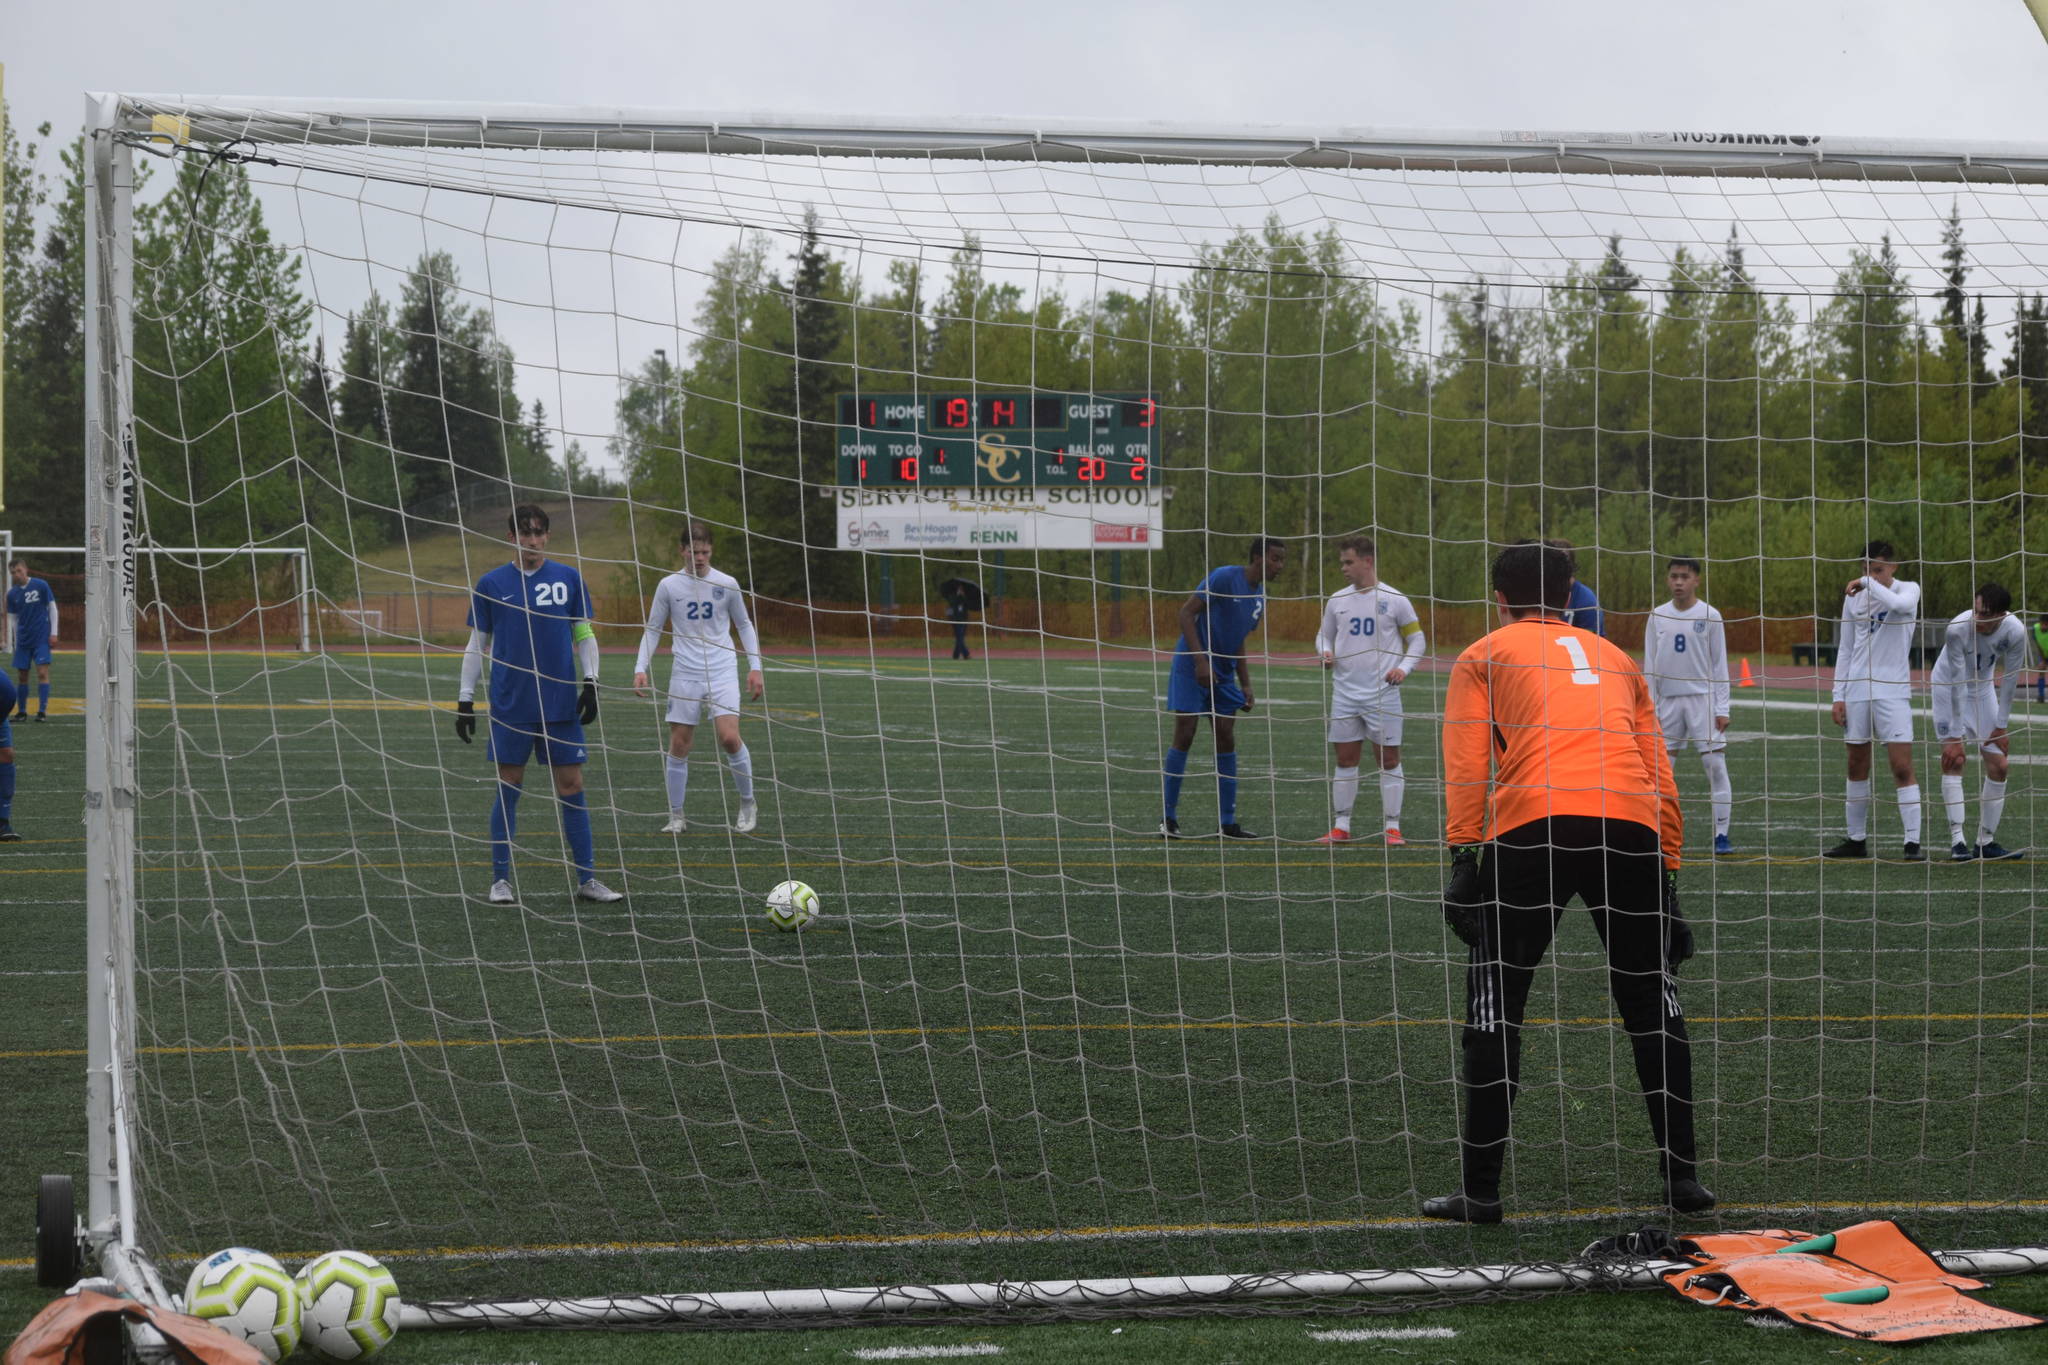 Josh Hieber lines up a penalty kick during the state championship game in Anchorage, Alaska on Saturday, May 29, 2021. (Camille Botello / Peninsula Clarion)